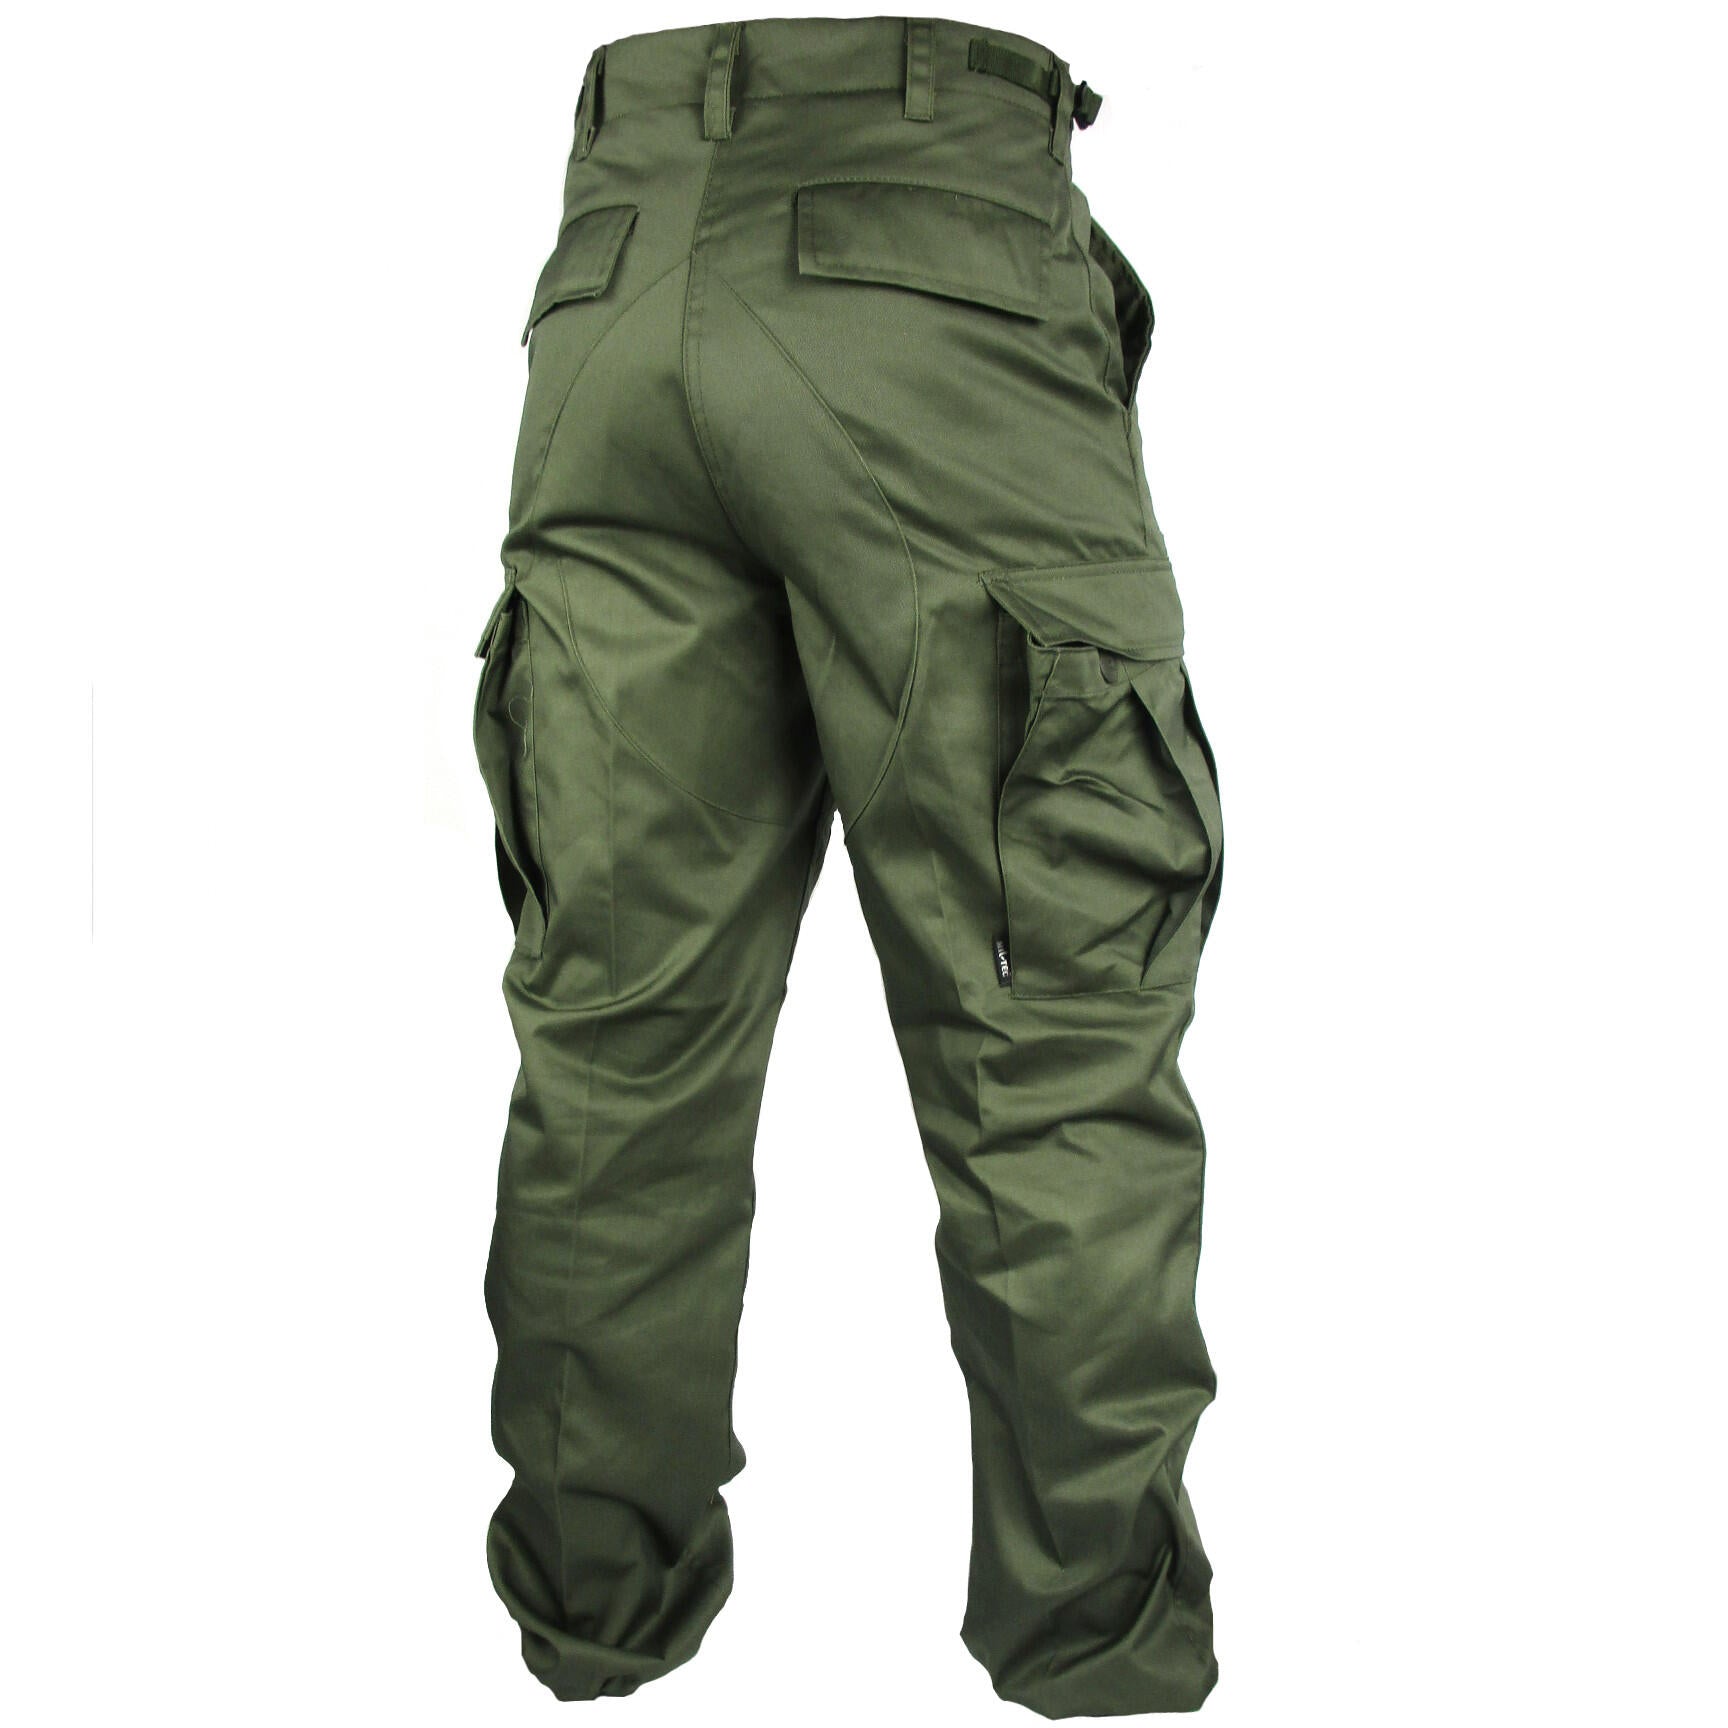 Olive Drab BDU Trousers - Army & Outdoors